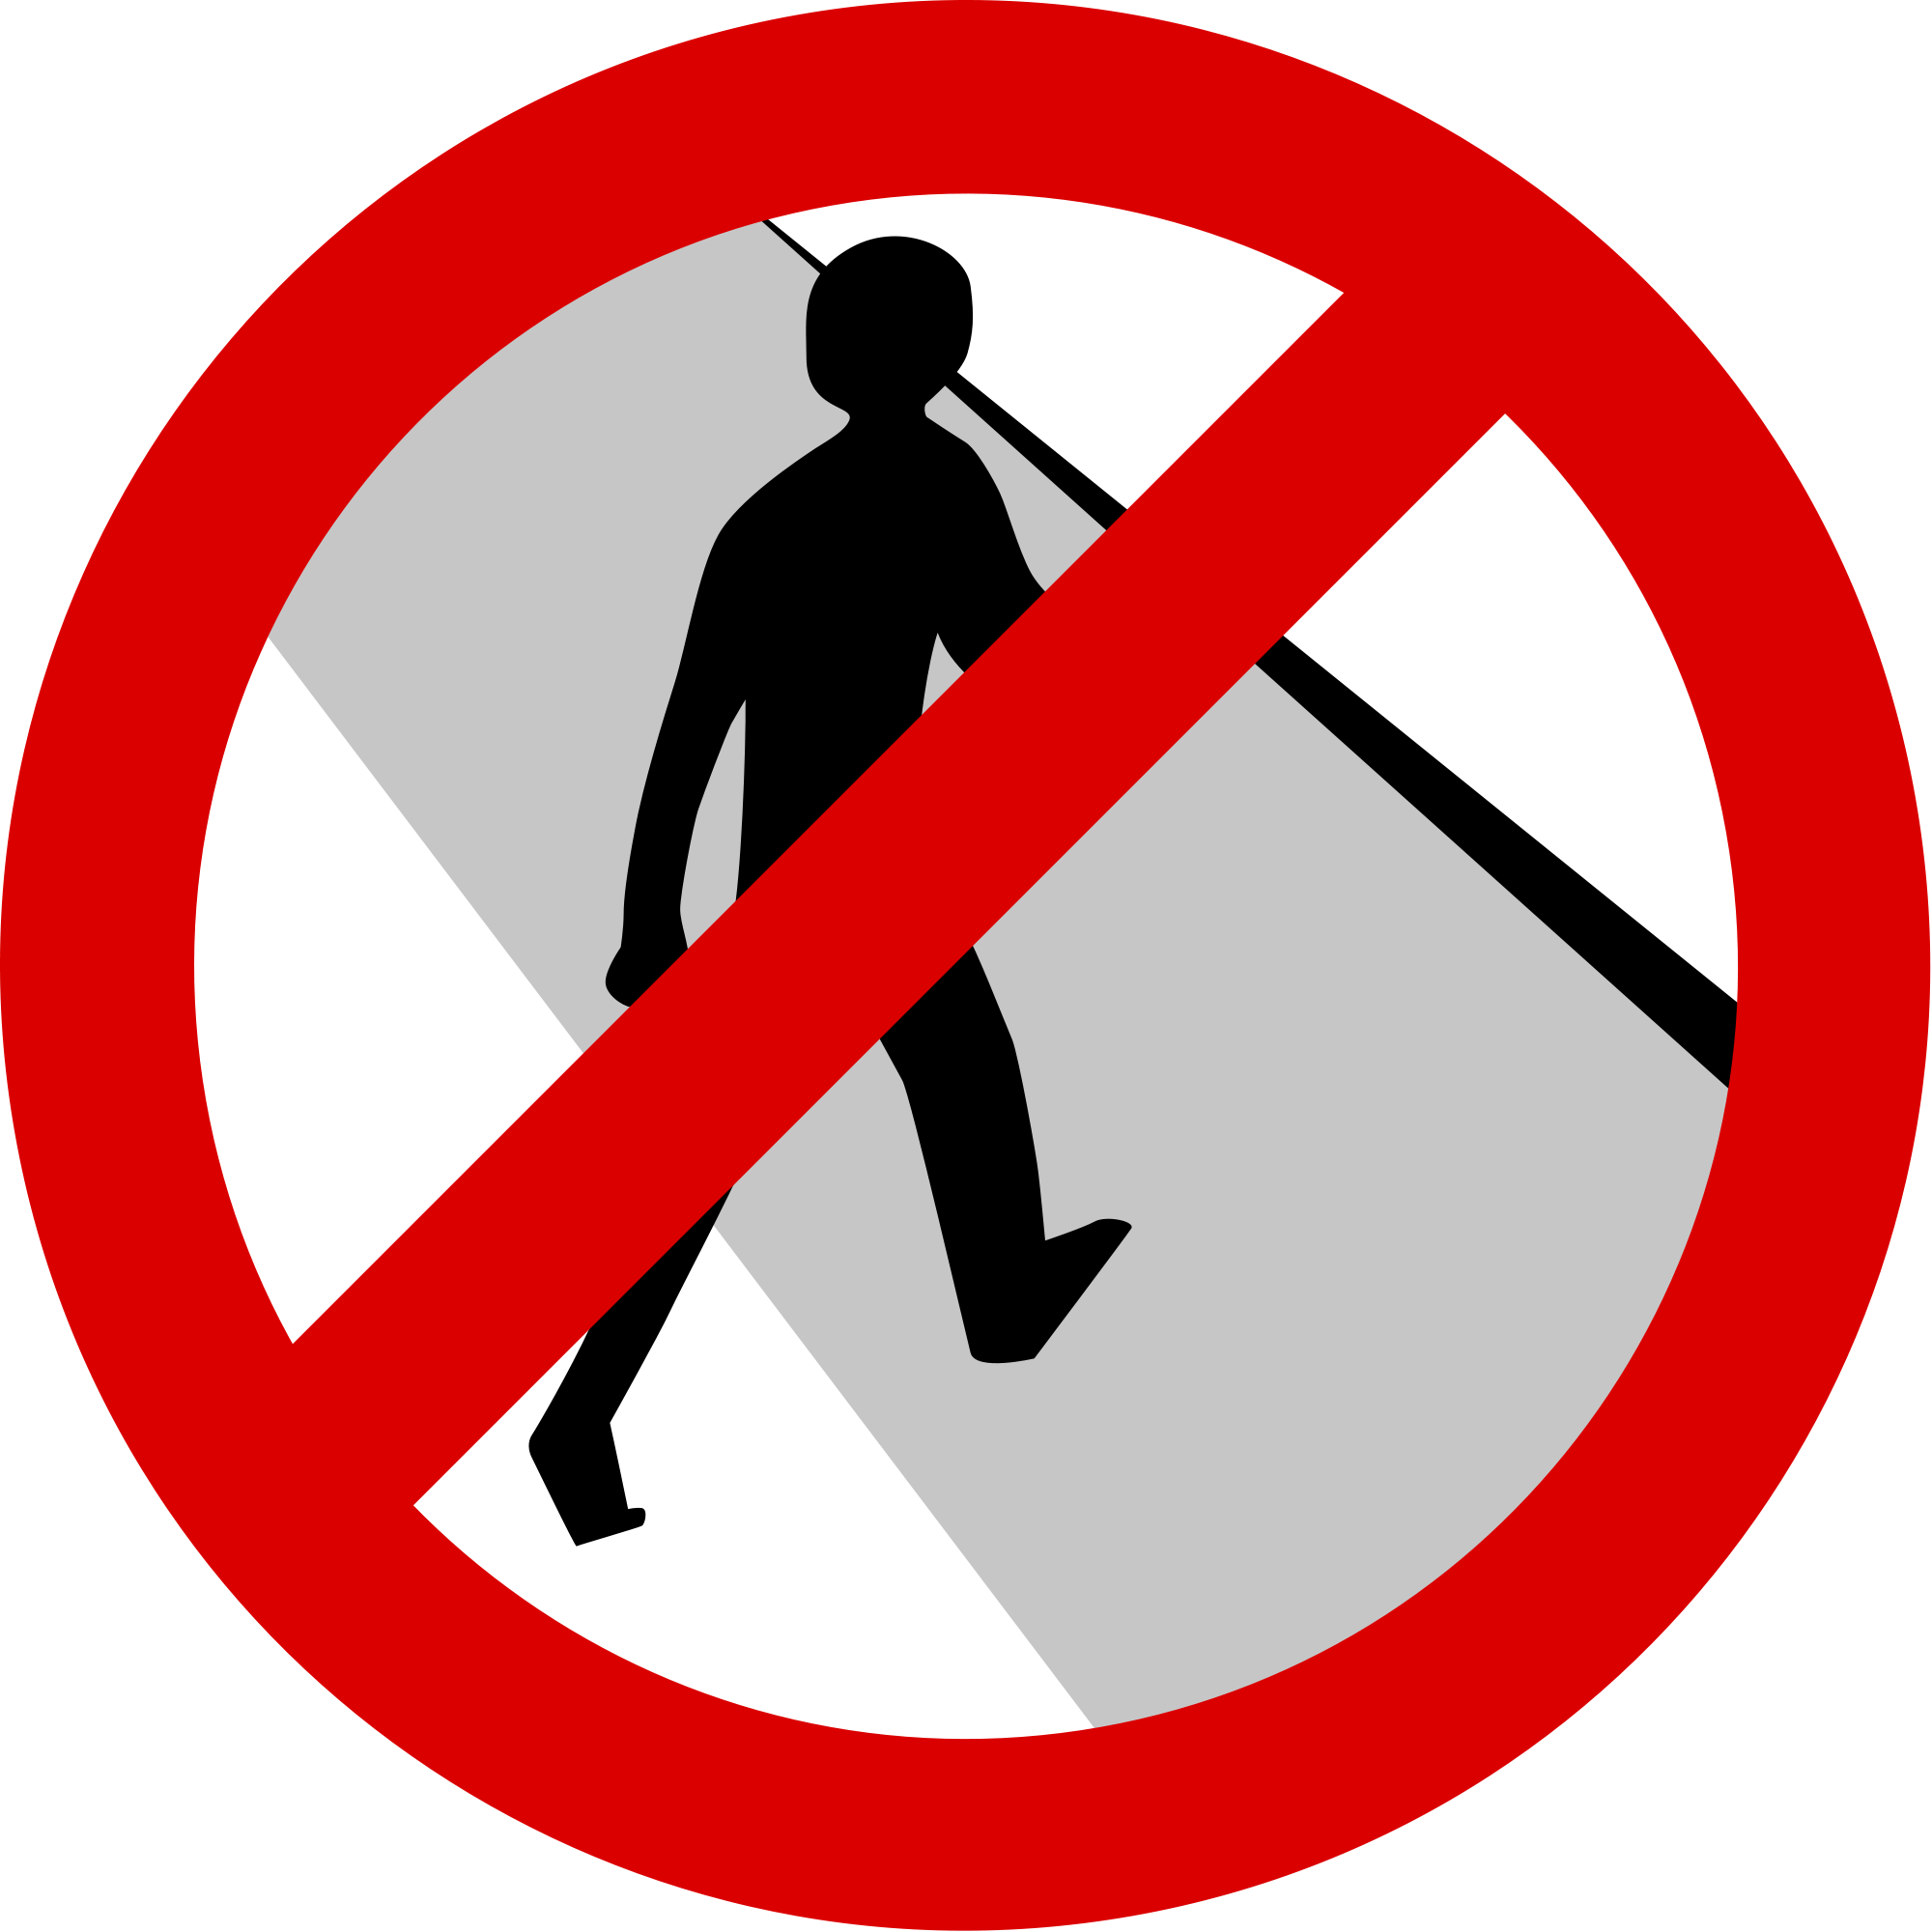 laws clipart road